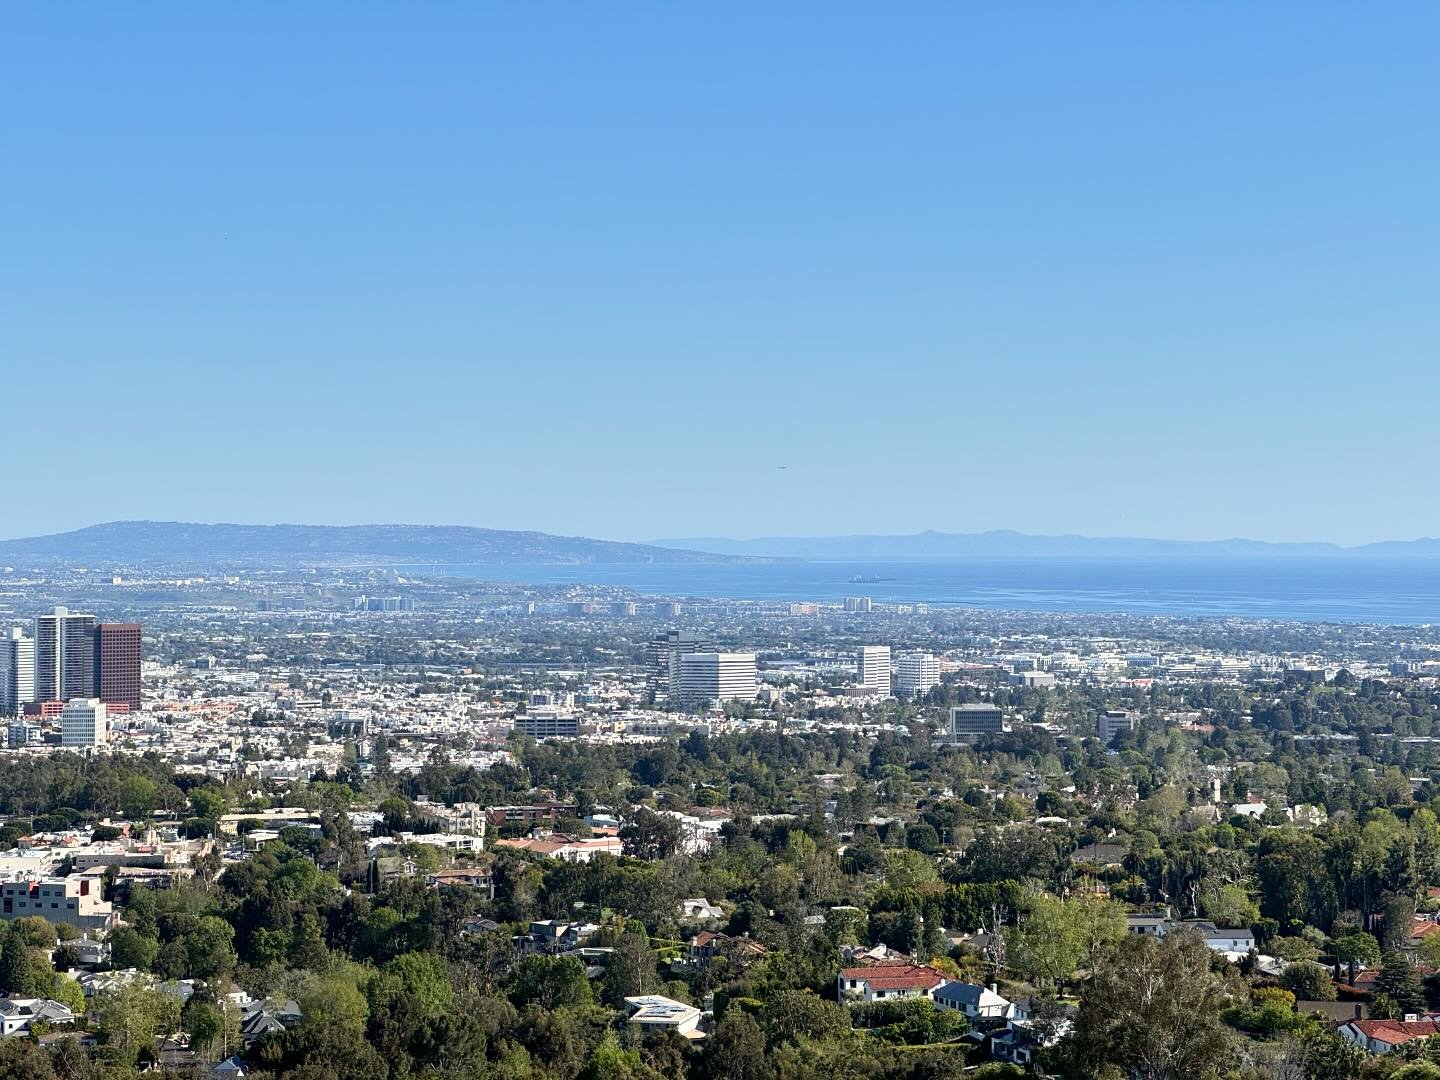 Newsflash: Los Angeles can be beautiful! Amazing views from the Getty Museum yesterday.